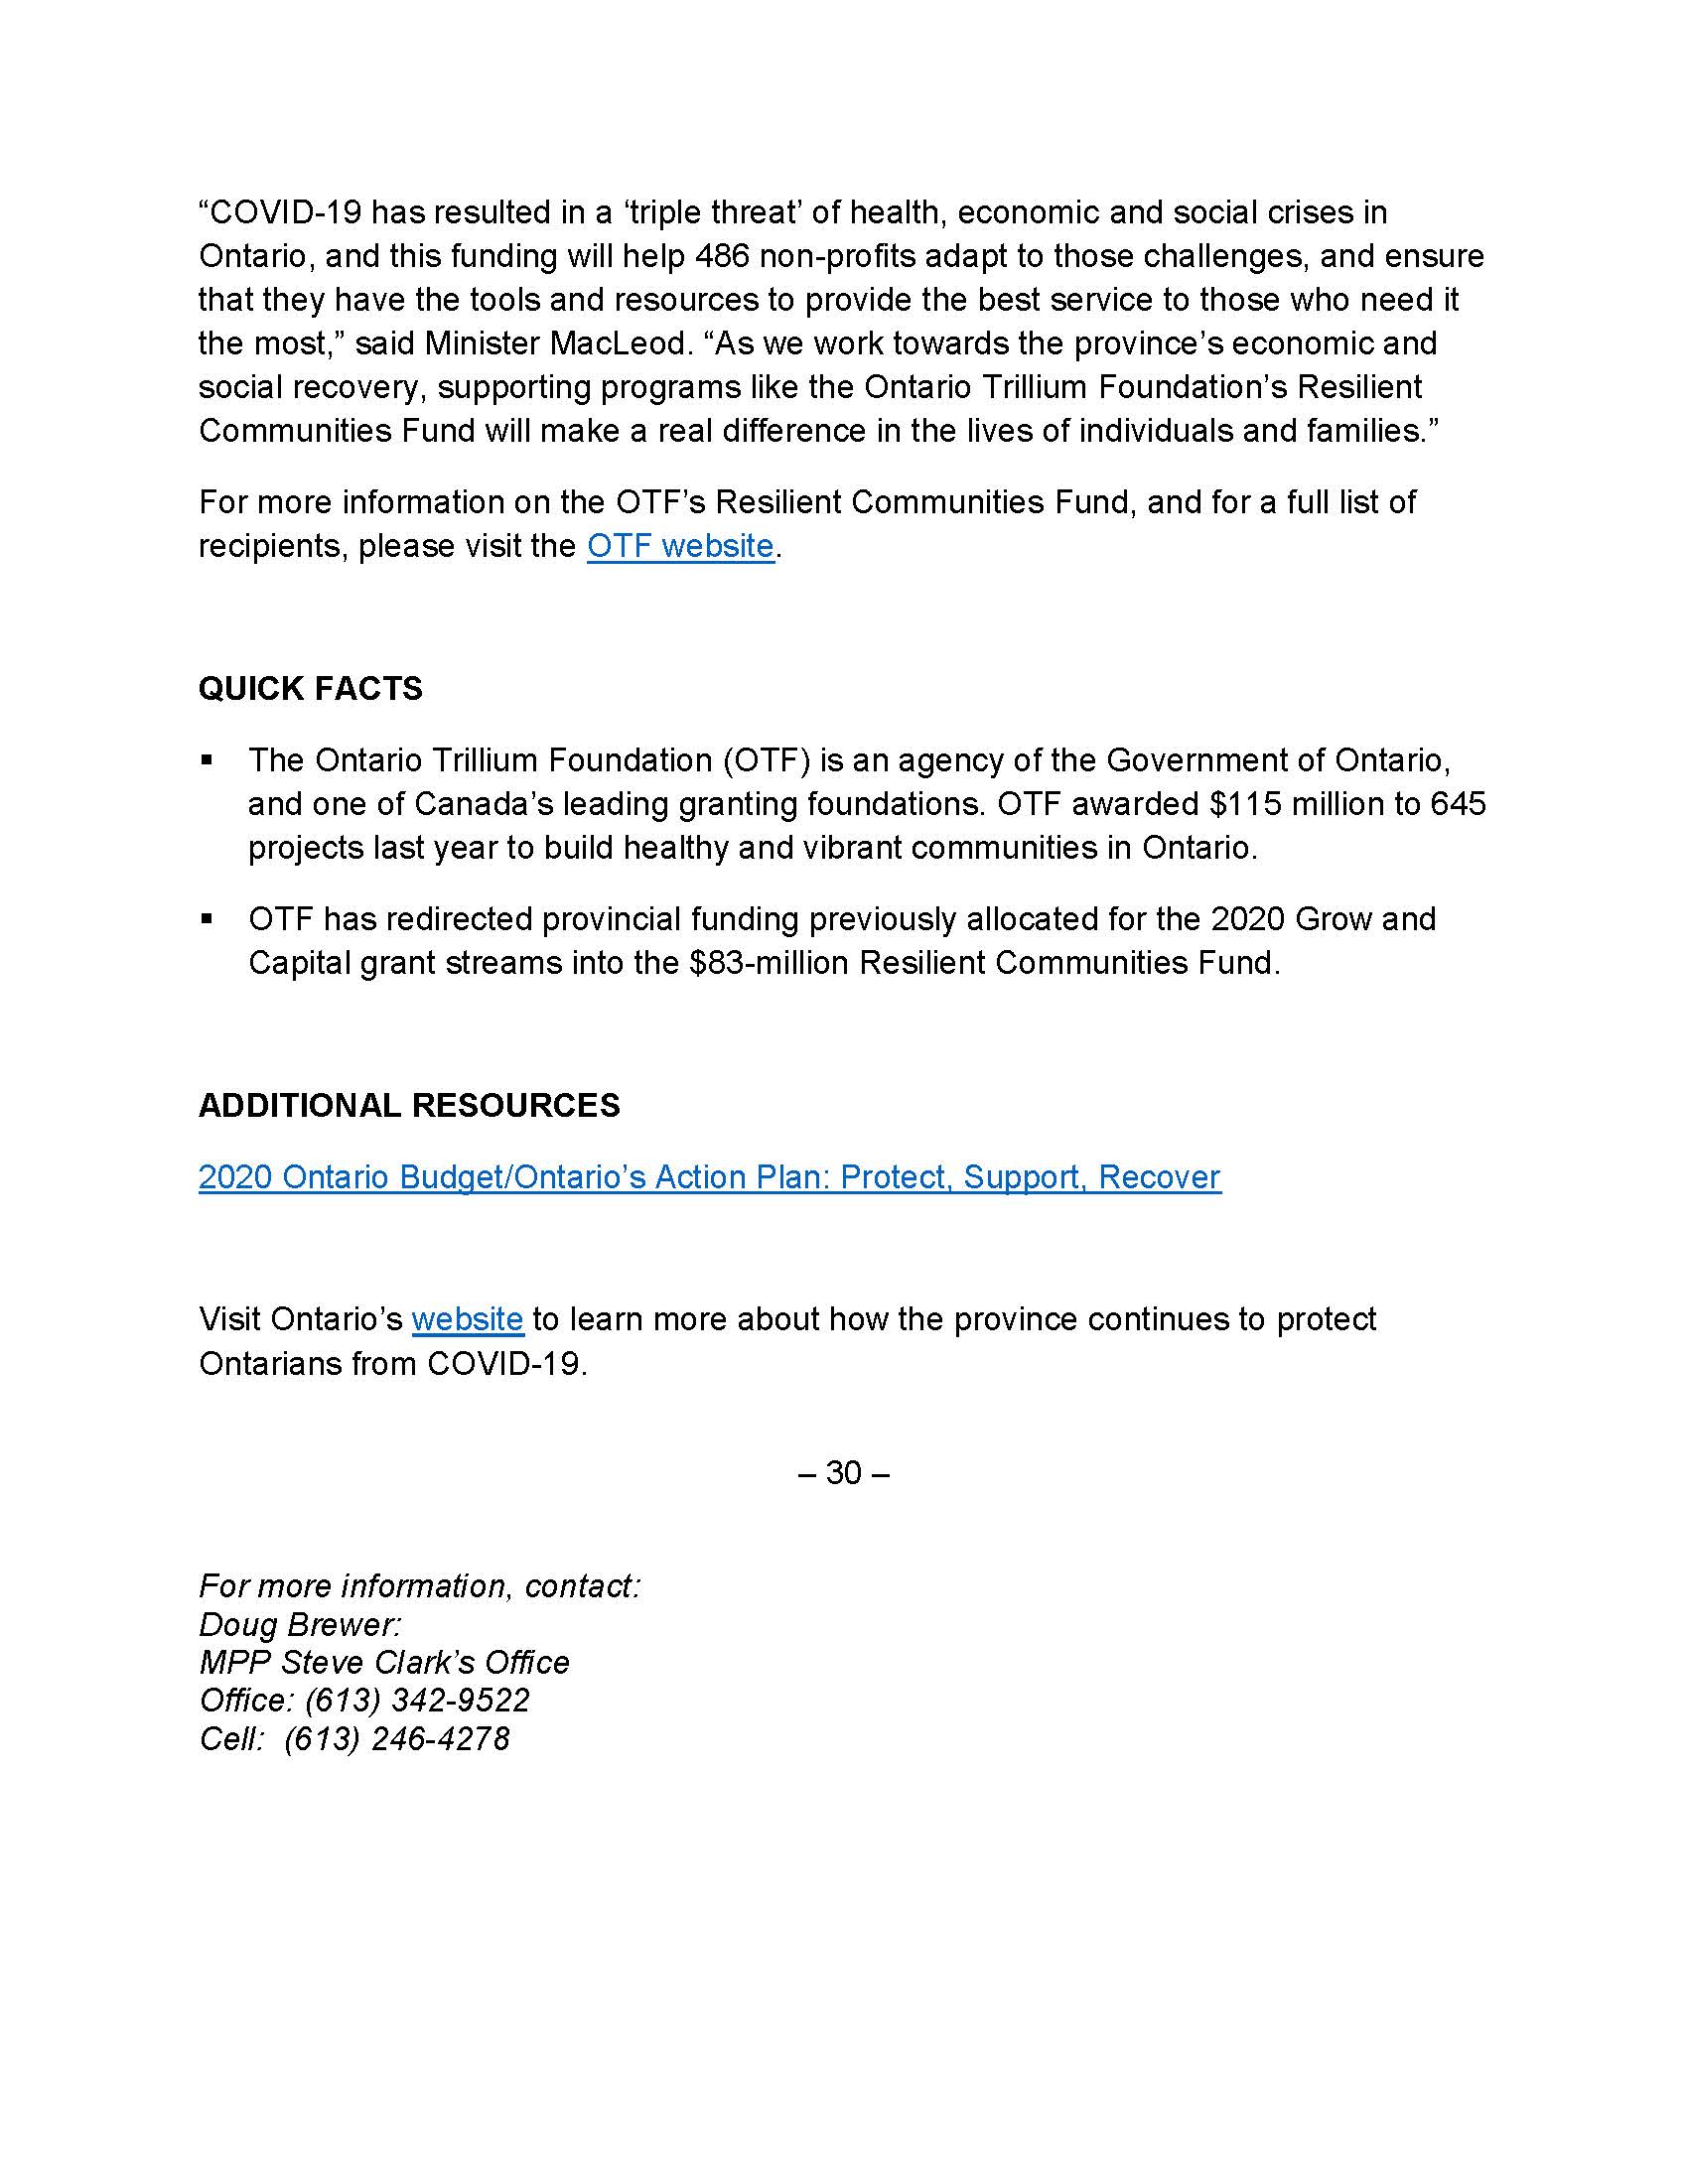 Media Release OTF RCF Page 2